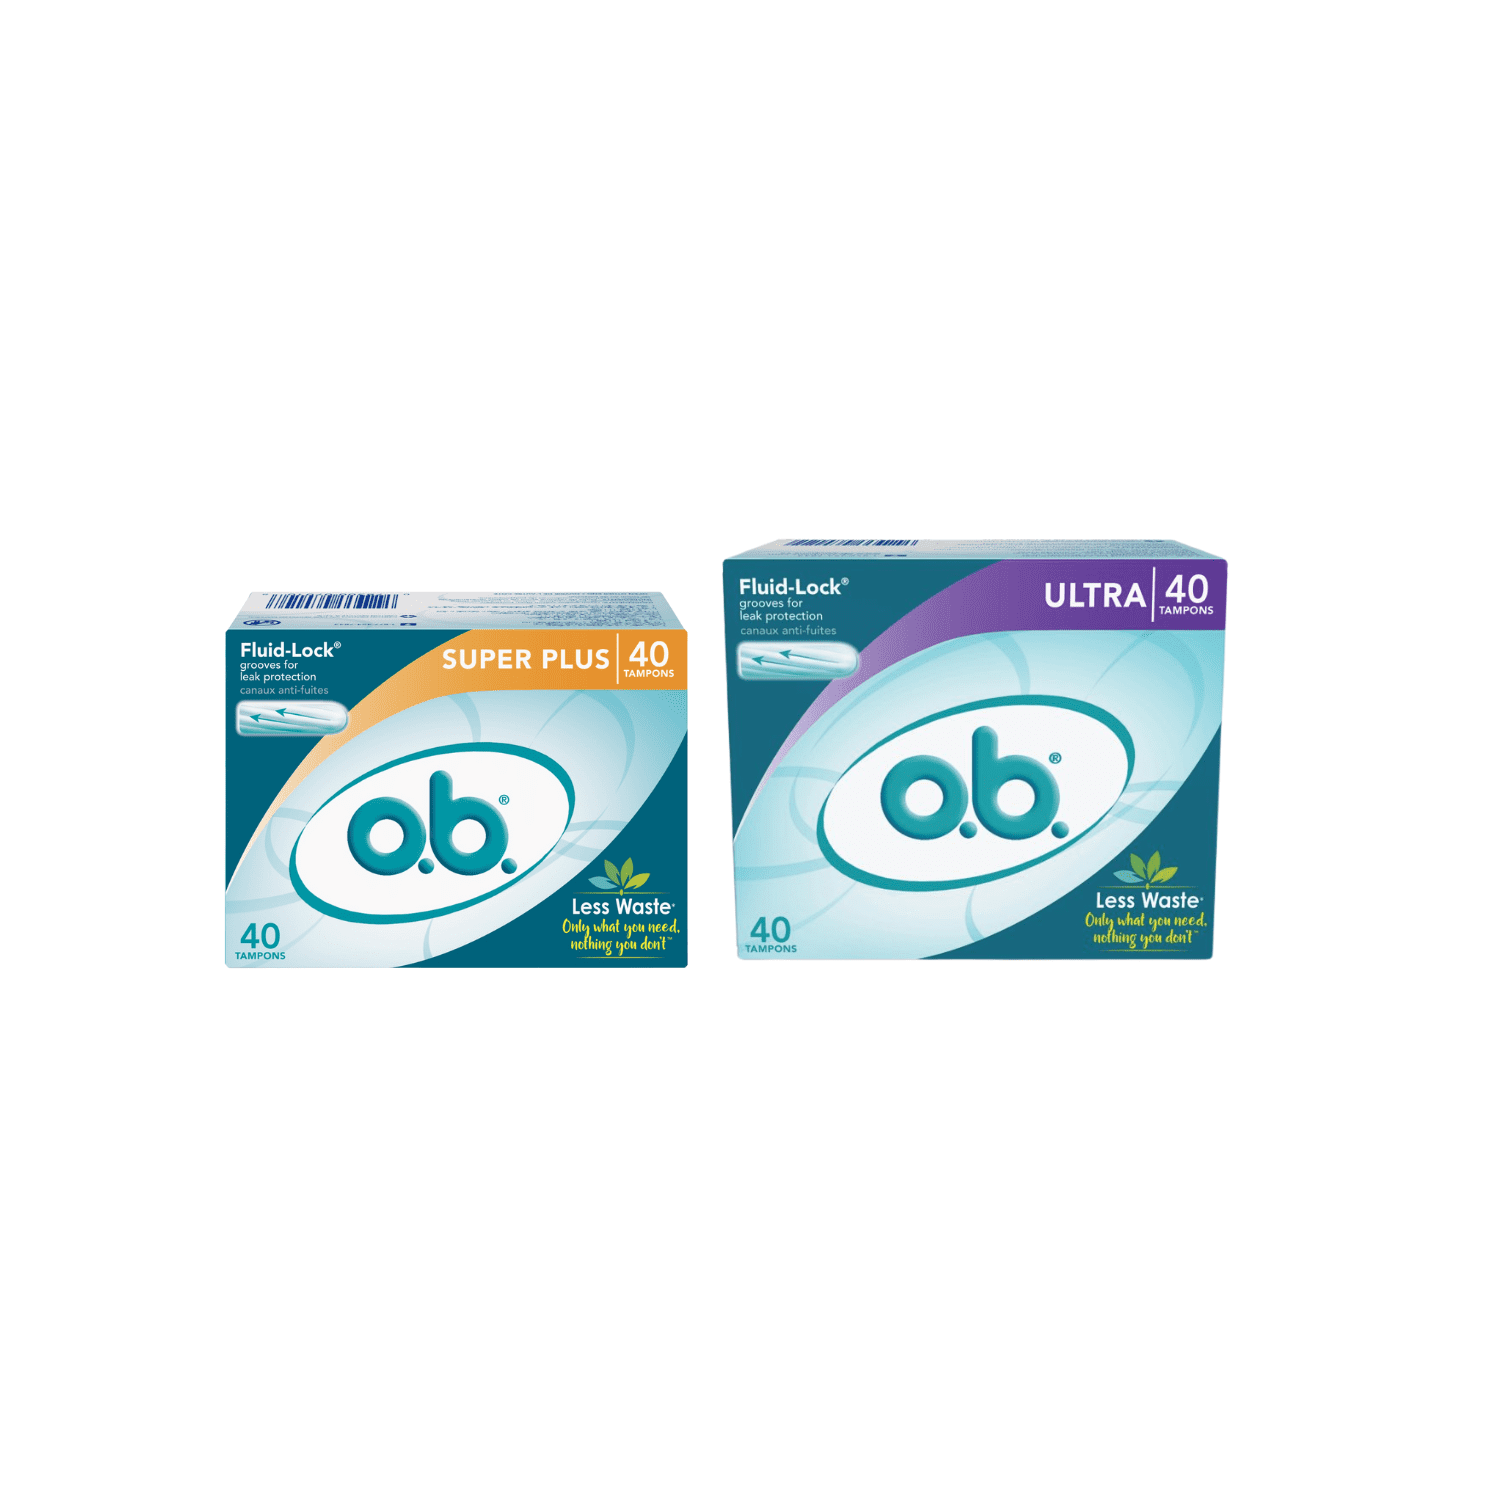 o.b. Tampons Super Plus Absorbency 40 Count, Ultra Absorbency Tampons 40  Count Fluid Lock with eBooklet- Set of 3 (80 tampons in total) 